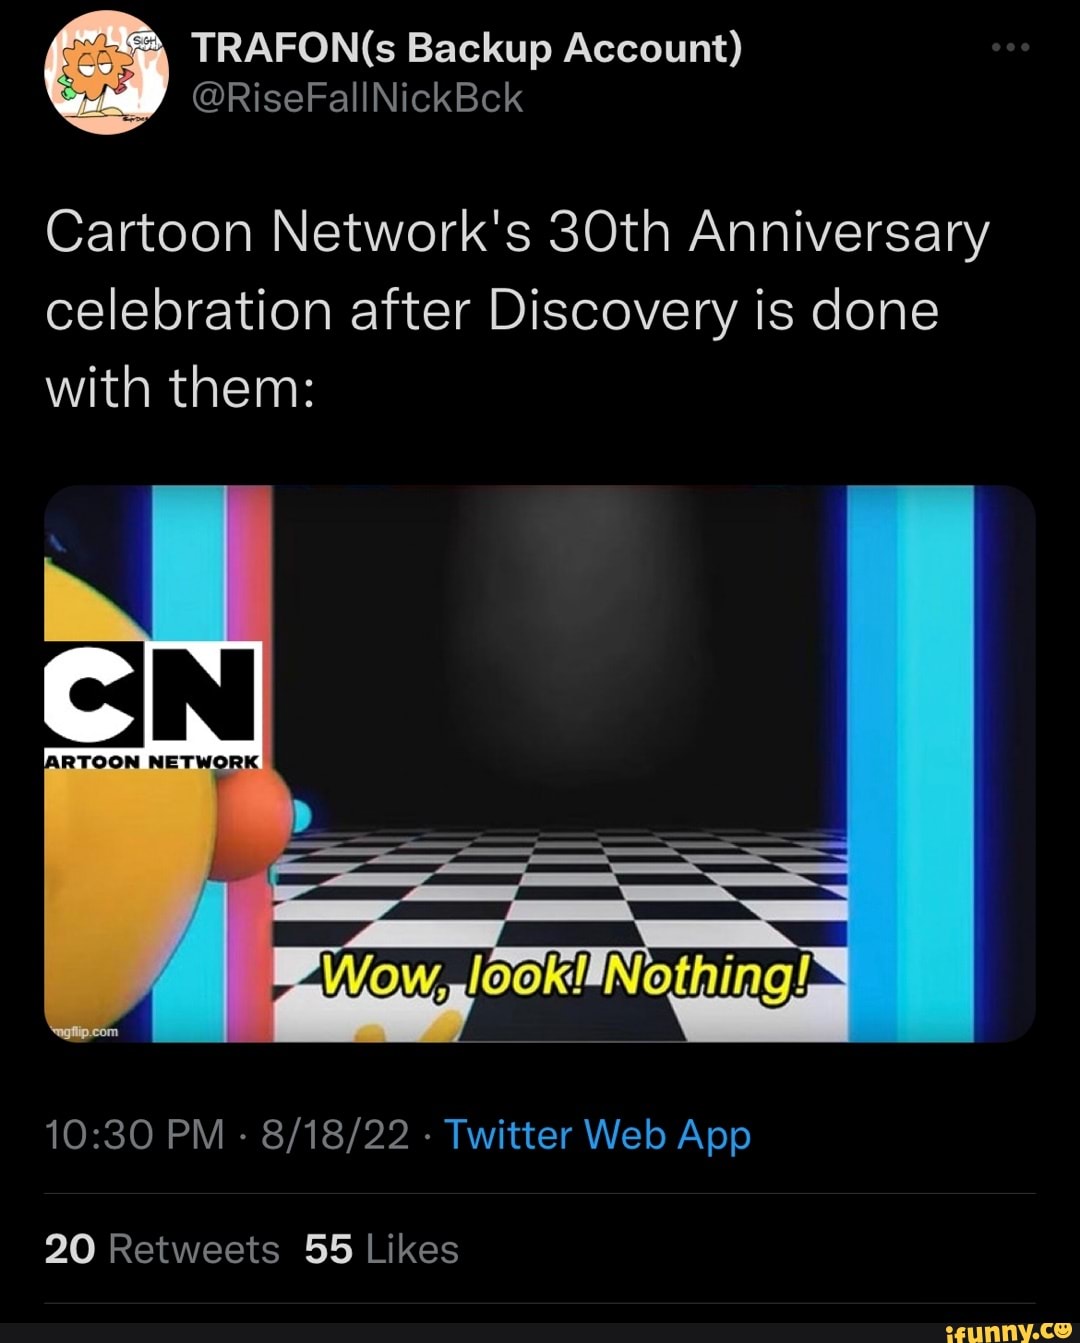 TRAFON(s Backup Account) on X: The 2010 CN Logo has officially been used  for 4296 days, and counting In February, it became the longest running Cartoon  Network logo used by them ever